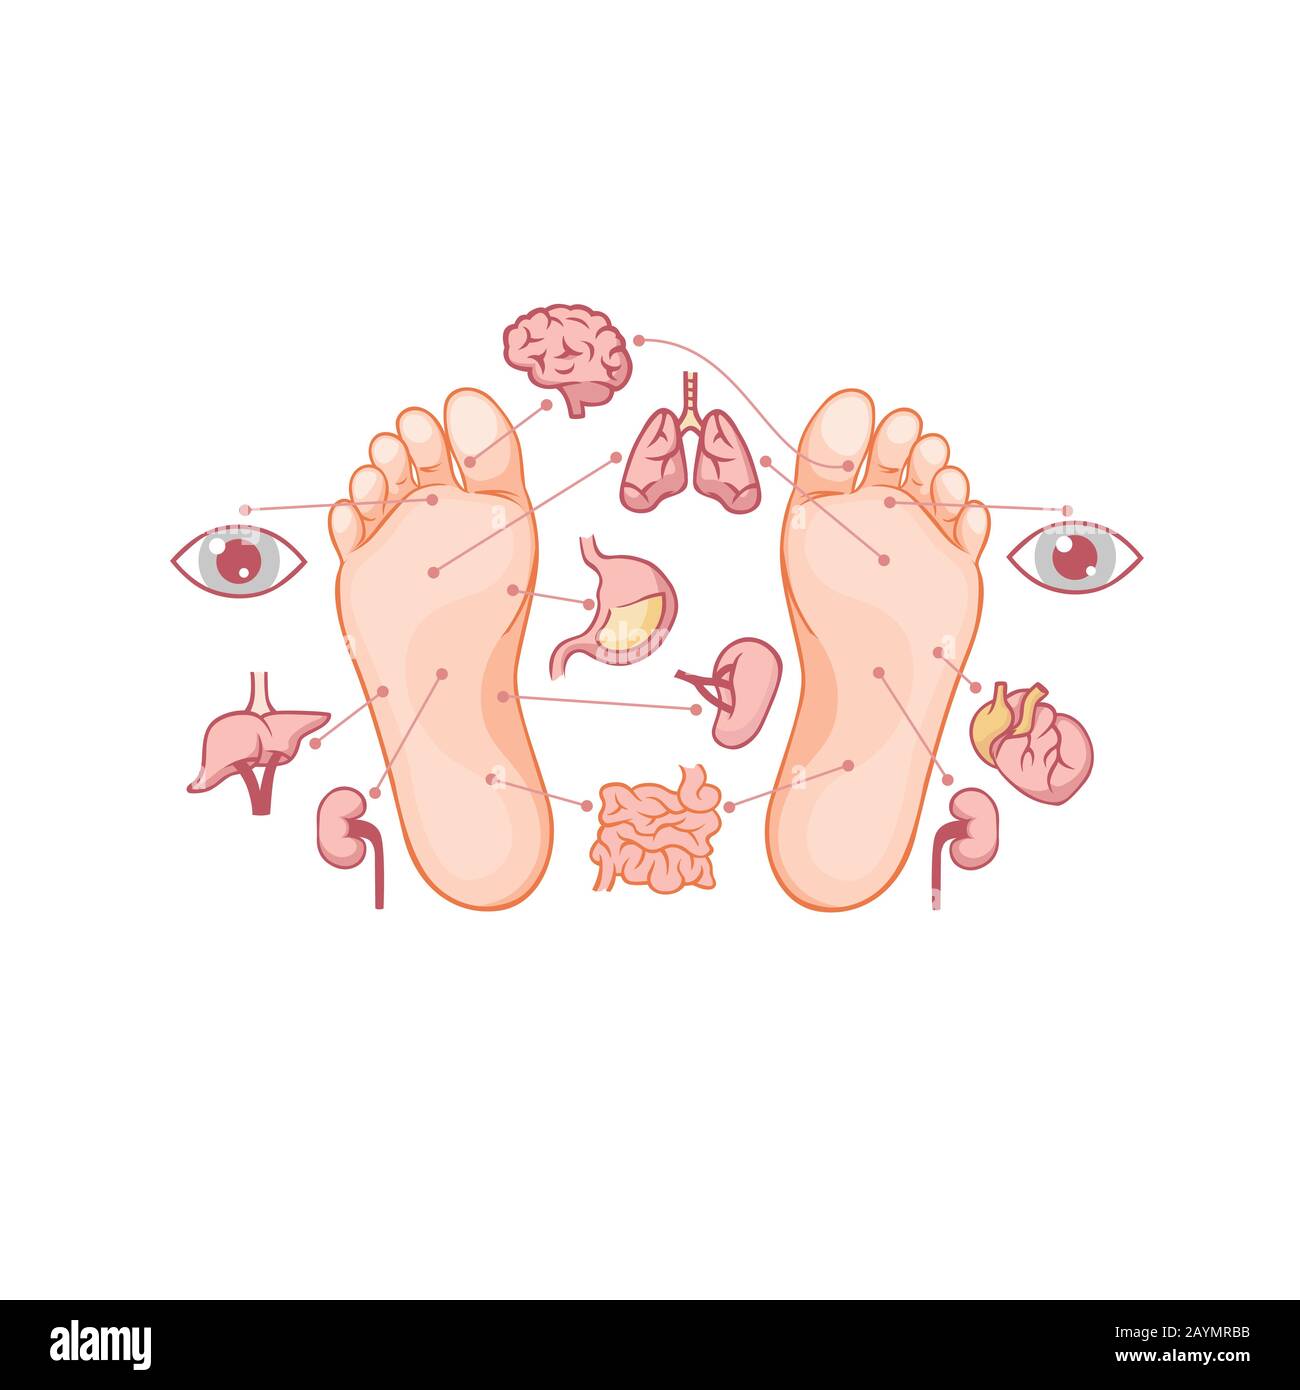 Cartoon soles of feet with marked by reflexology zones for acupuncture organs Stock Vector